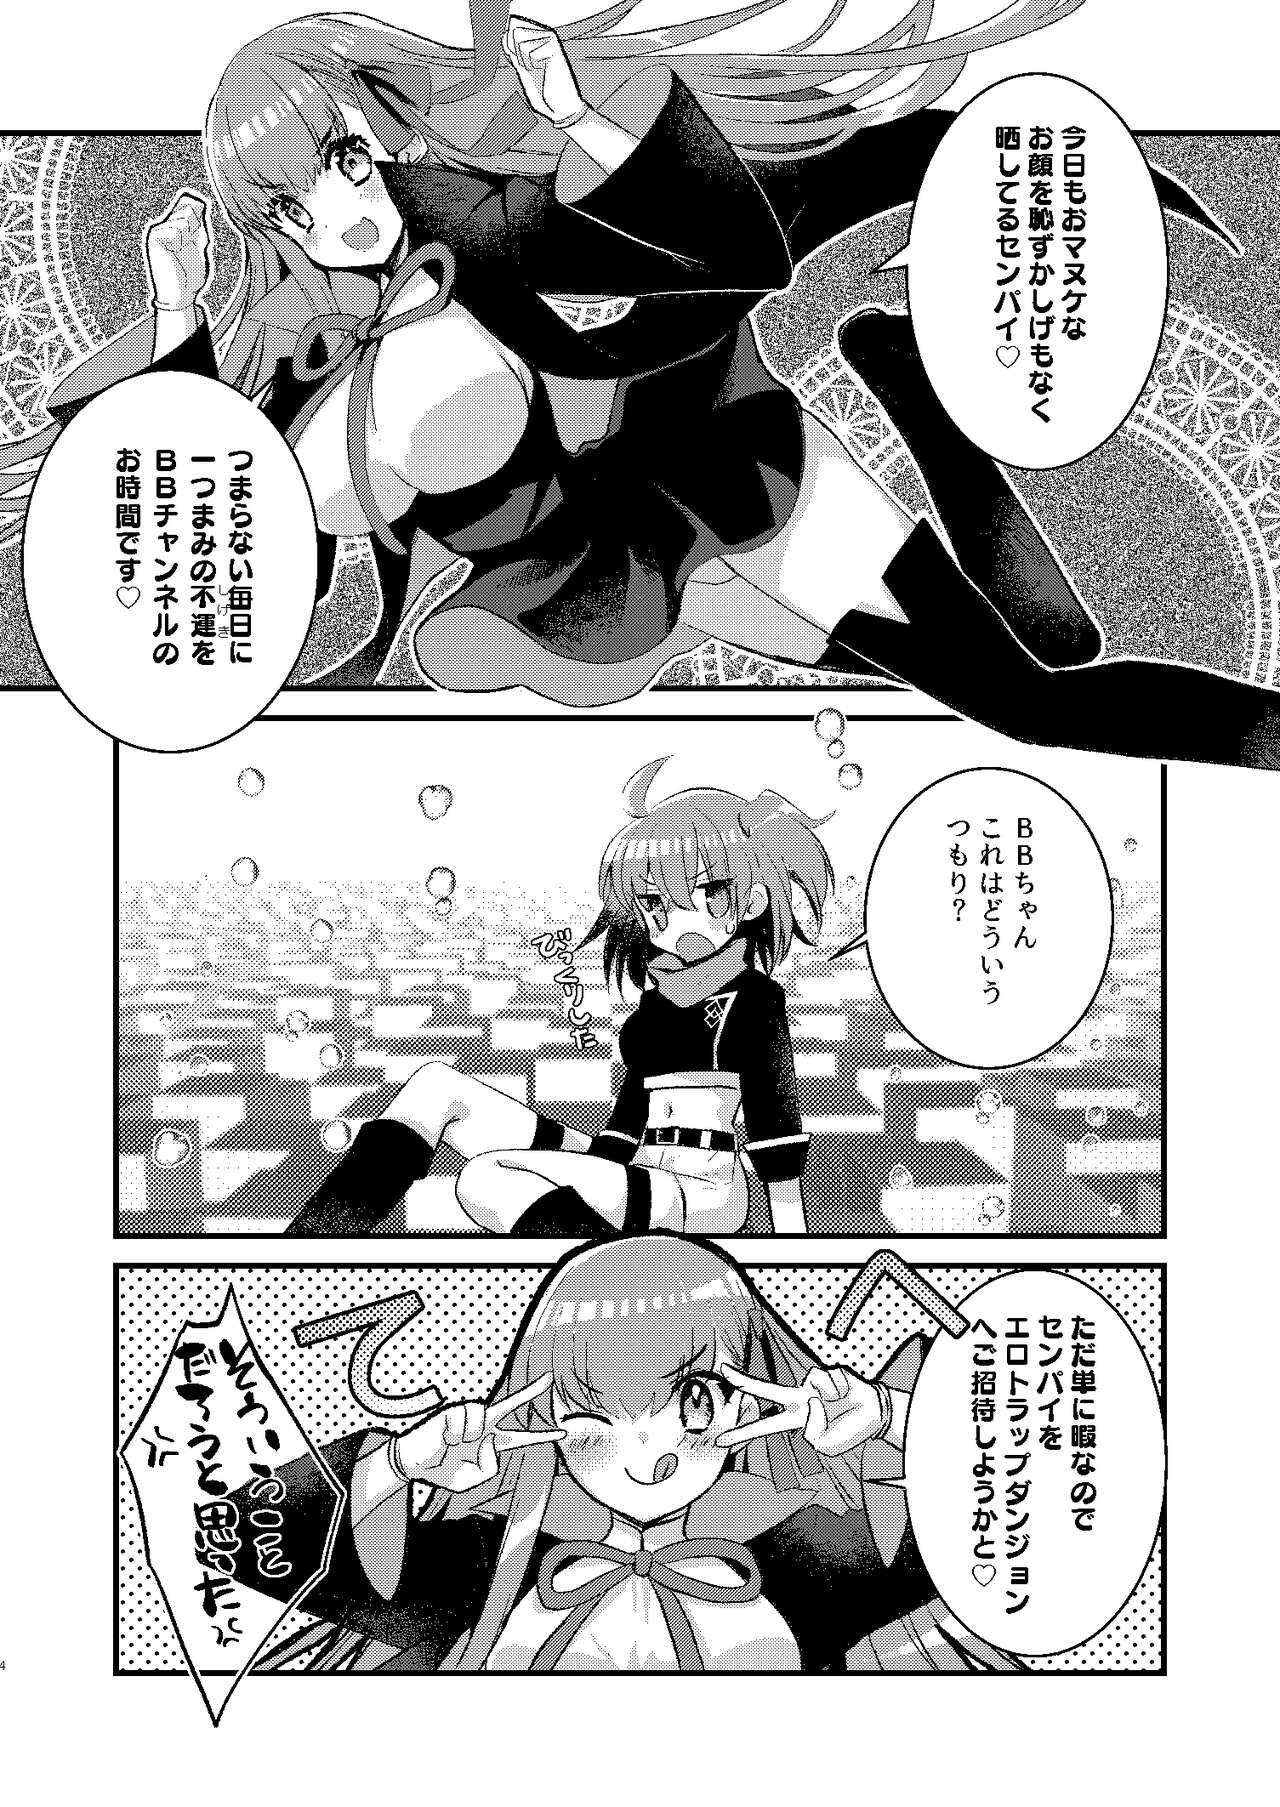 Climax BB-chan to Ero Trap Dungeon - Fate grand order Analplay - Page 4